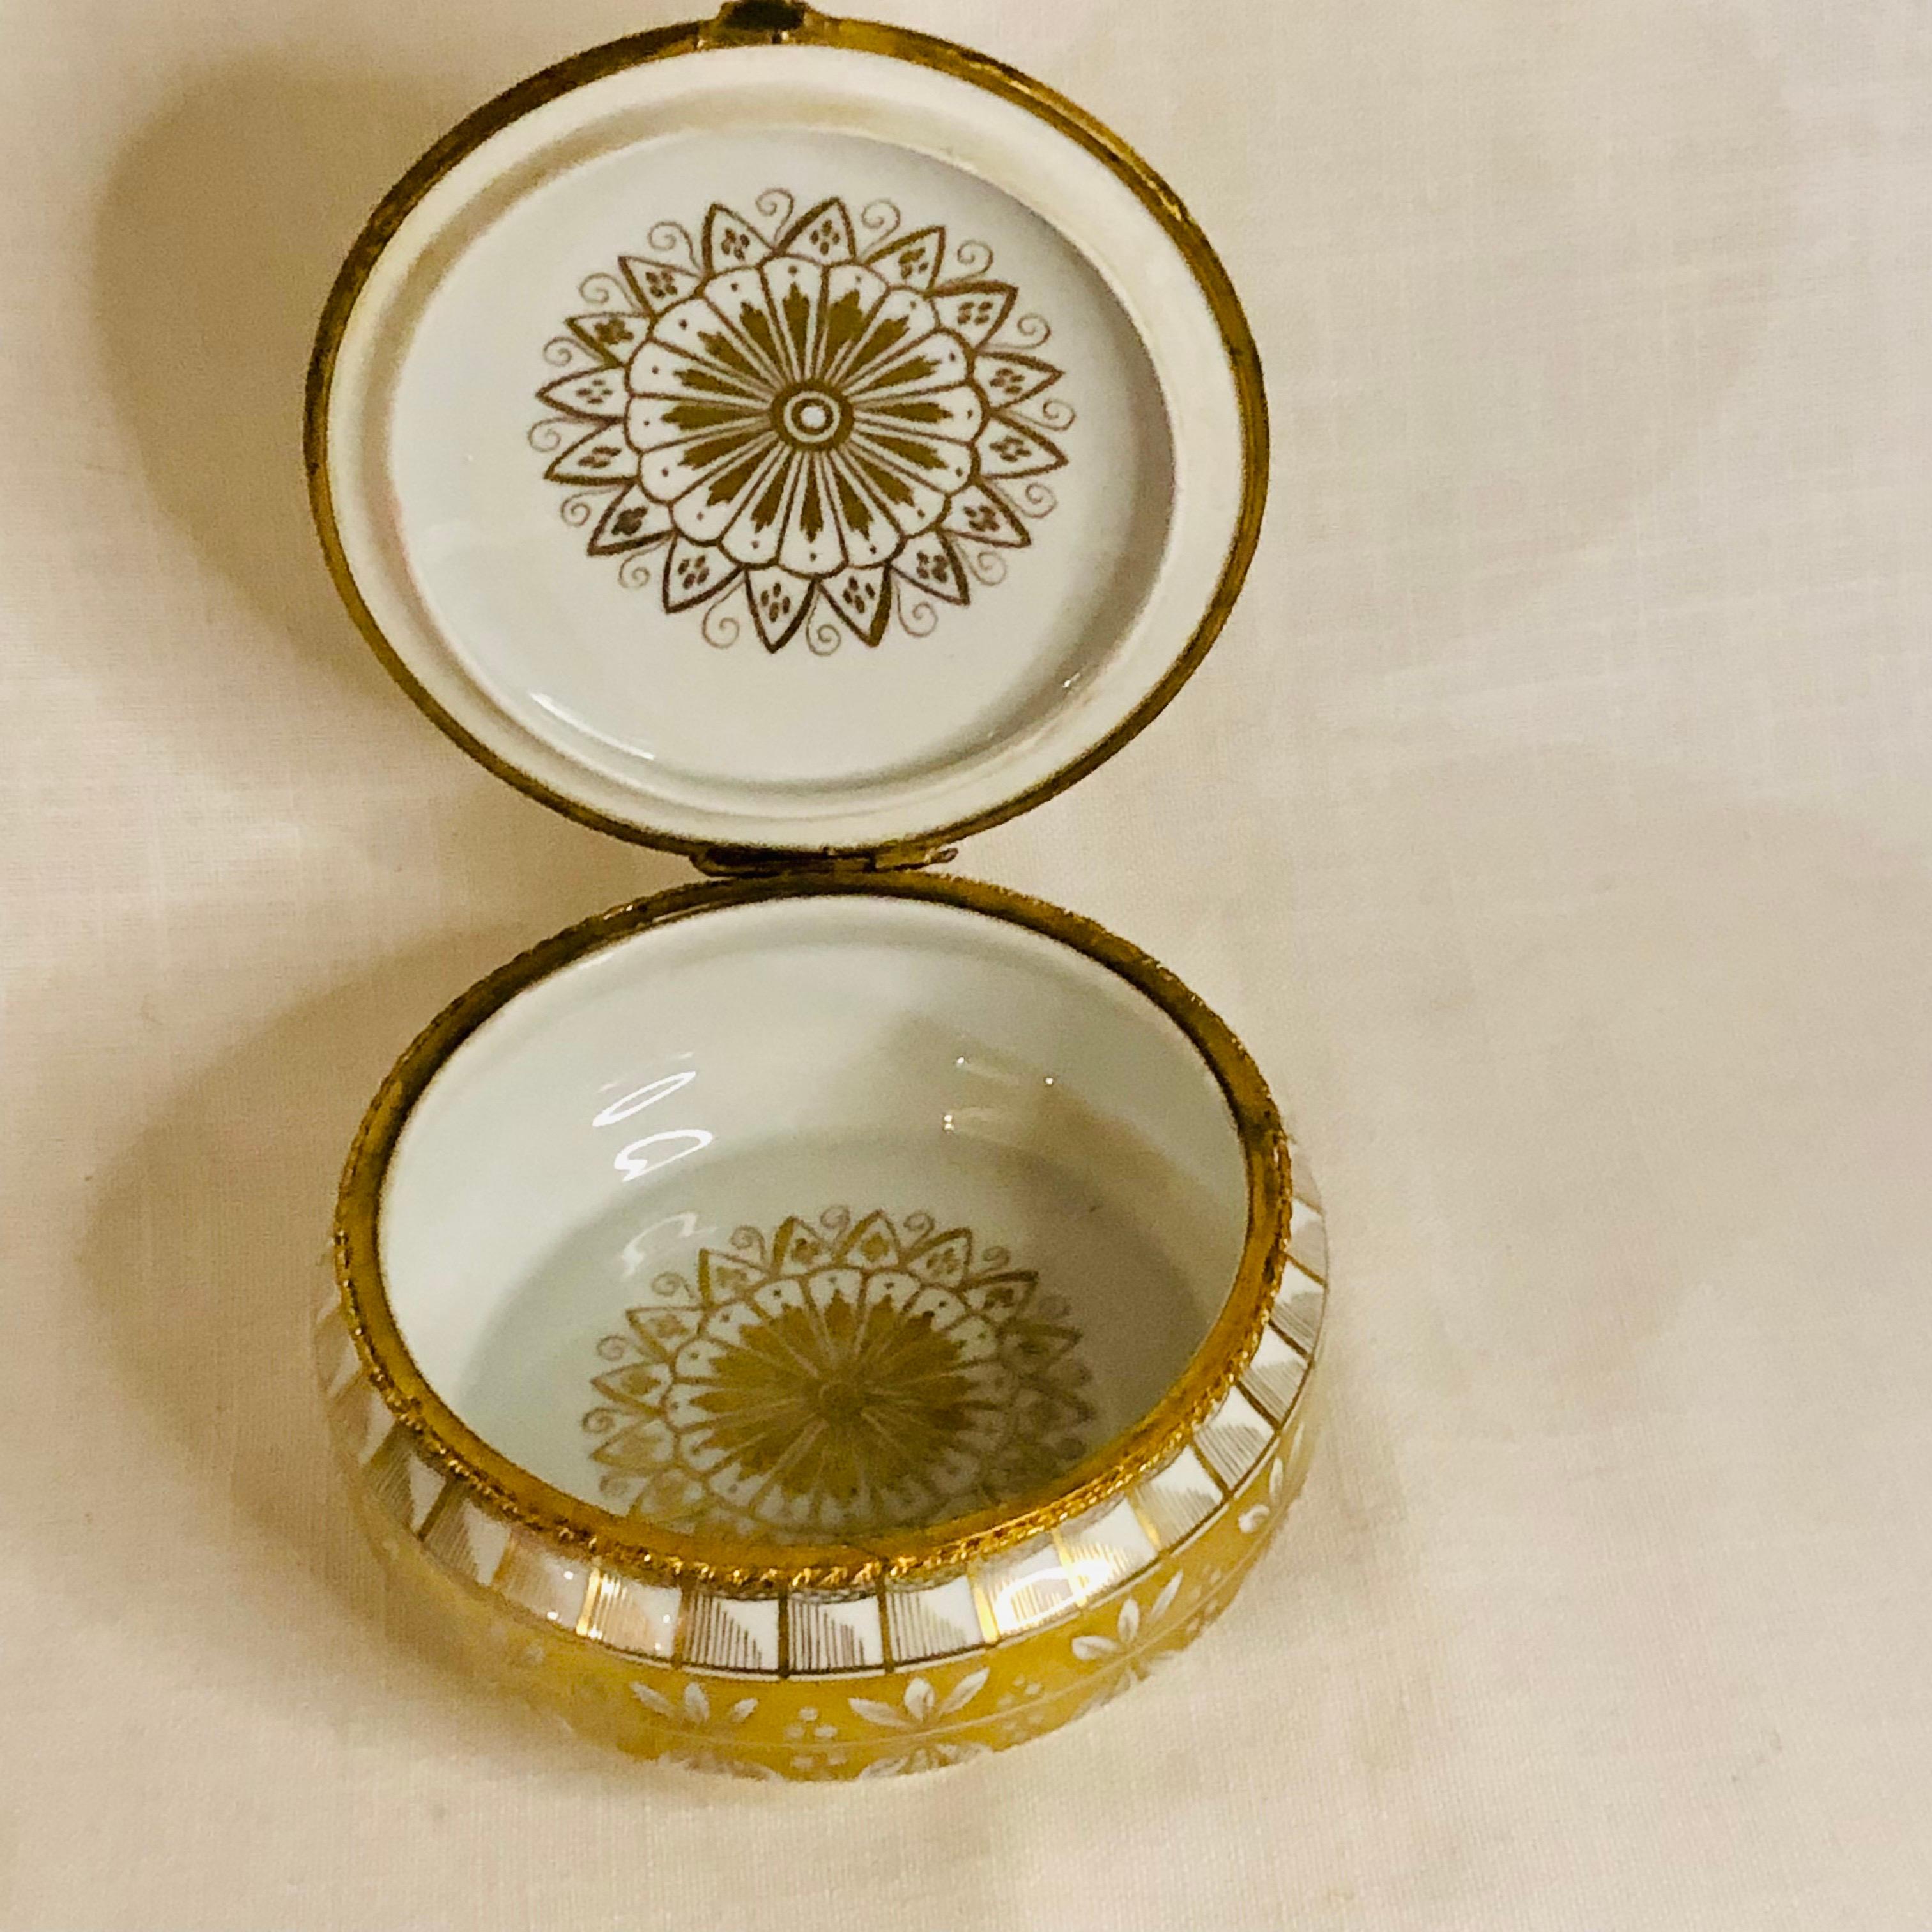 Le Tallec Porcelain Box with Gold Painted Decoration on a White Porcelain Ground 5